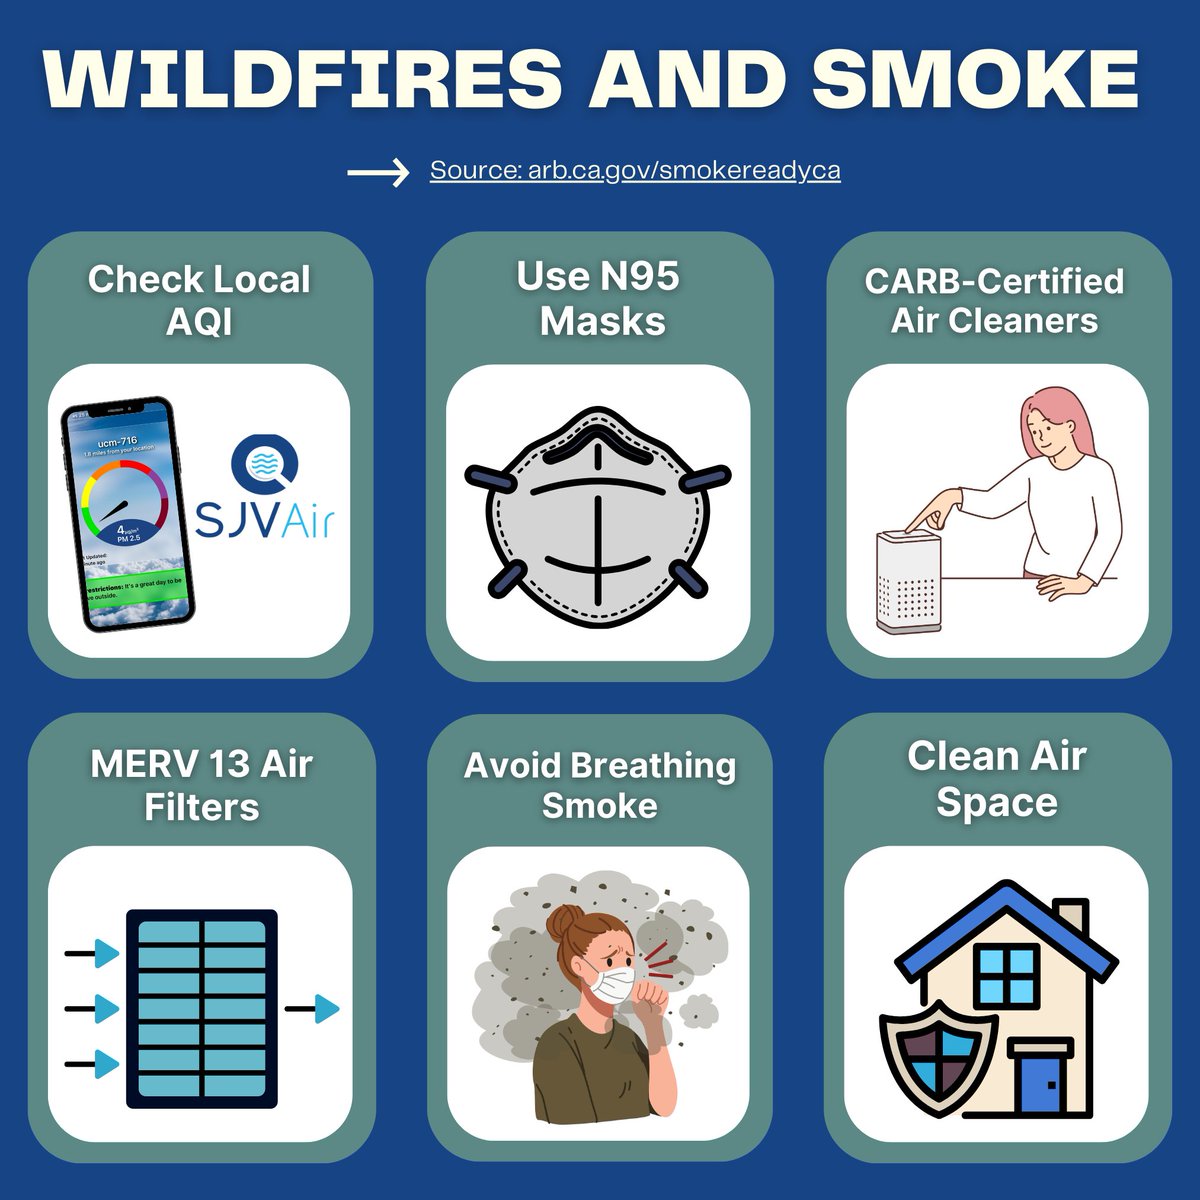 Wildfires produce a range of harmful air pollutants, from cancer-causing substances to tiny particles that can aggravate existing health problems and increase the risk of heart attack or stroke. Smoke particles can be small enough to get deep into the lungs and the bloodstream.